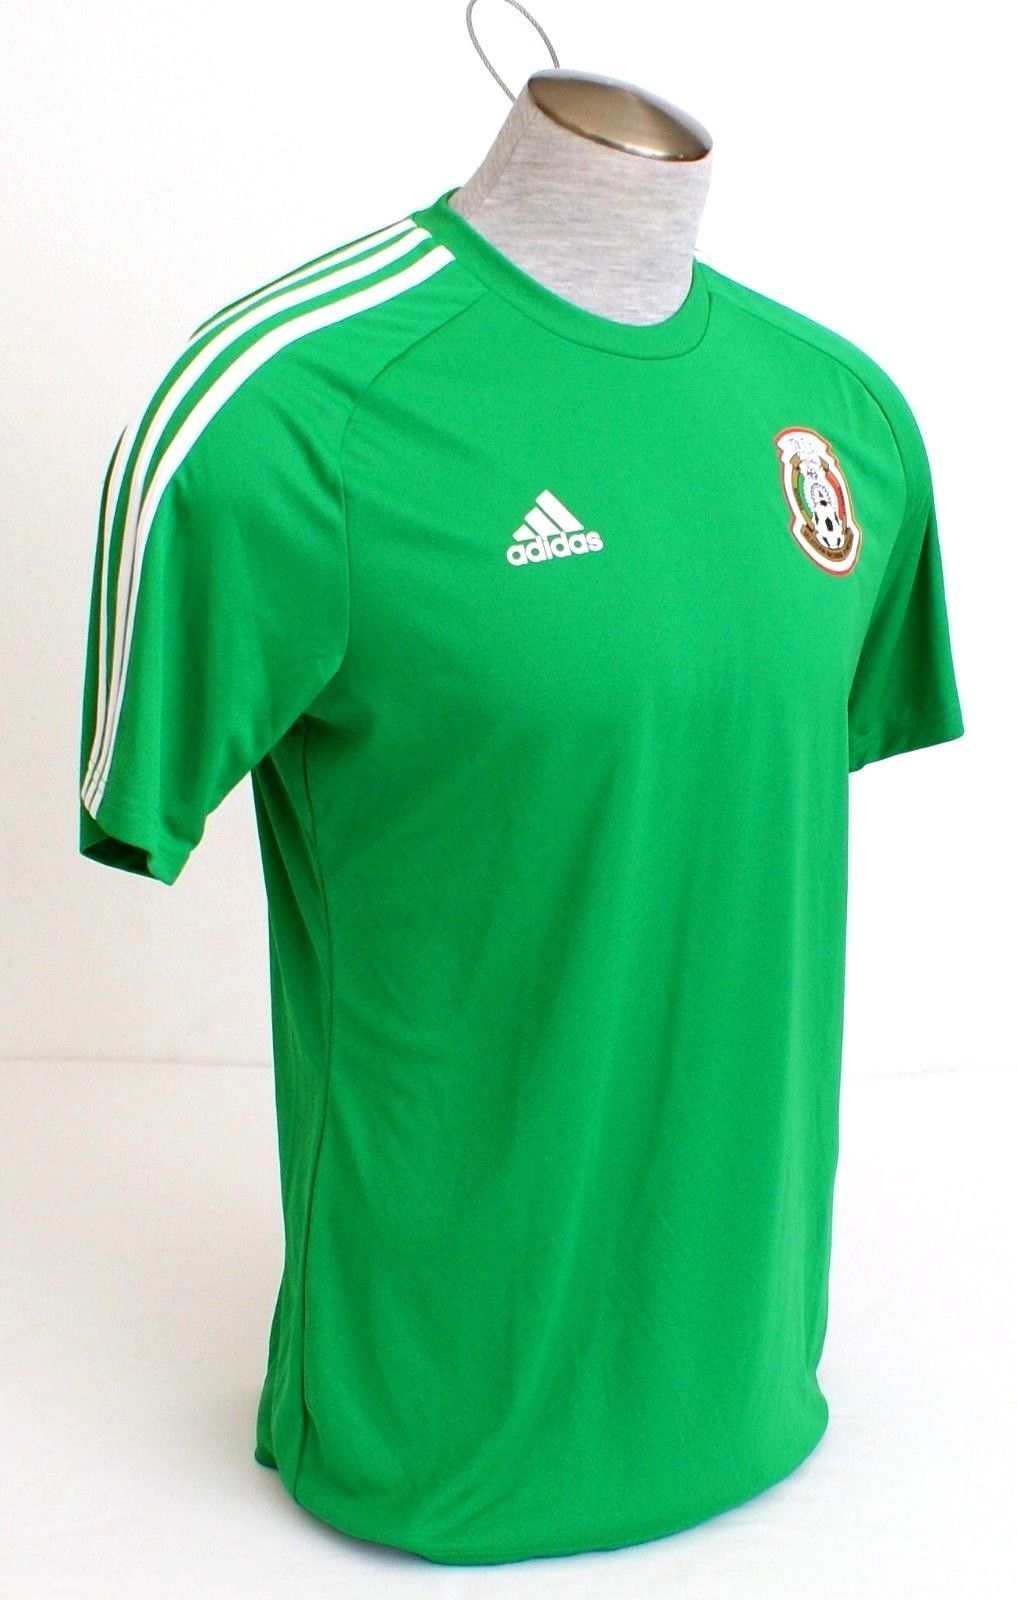 Download Adidas ClimaLite Green Mexico National Football Team Fan ...